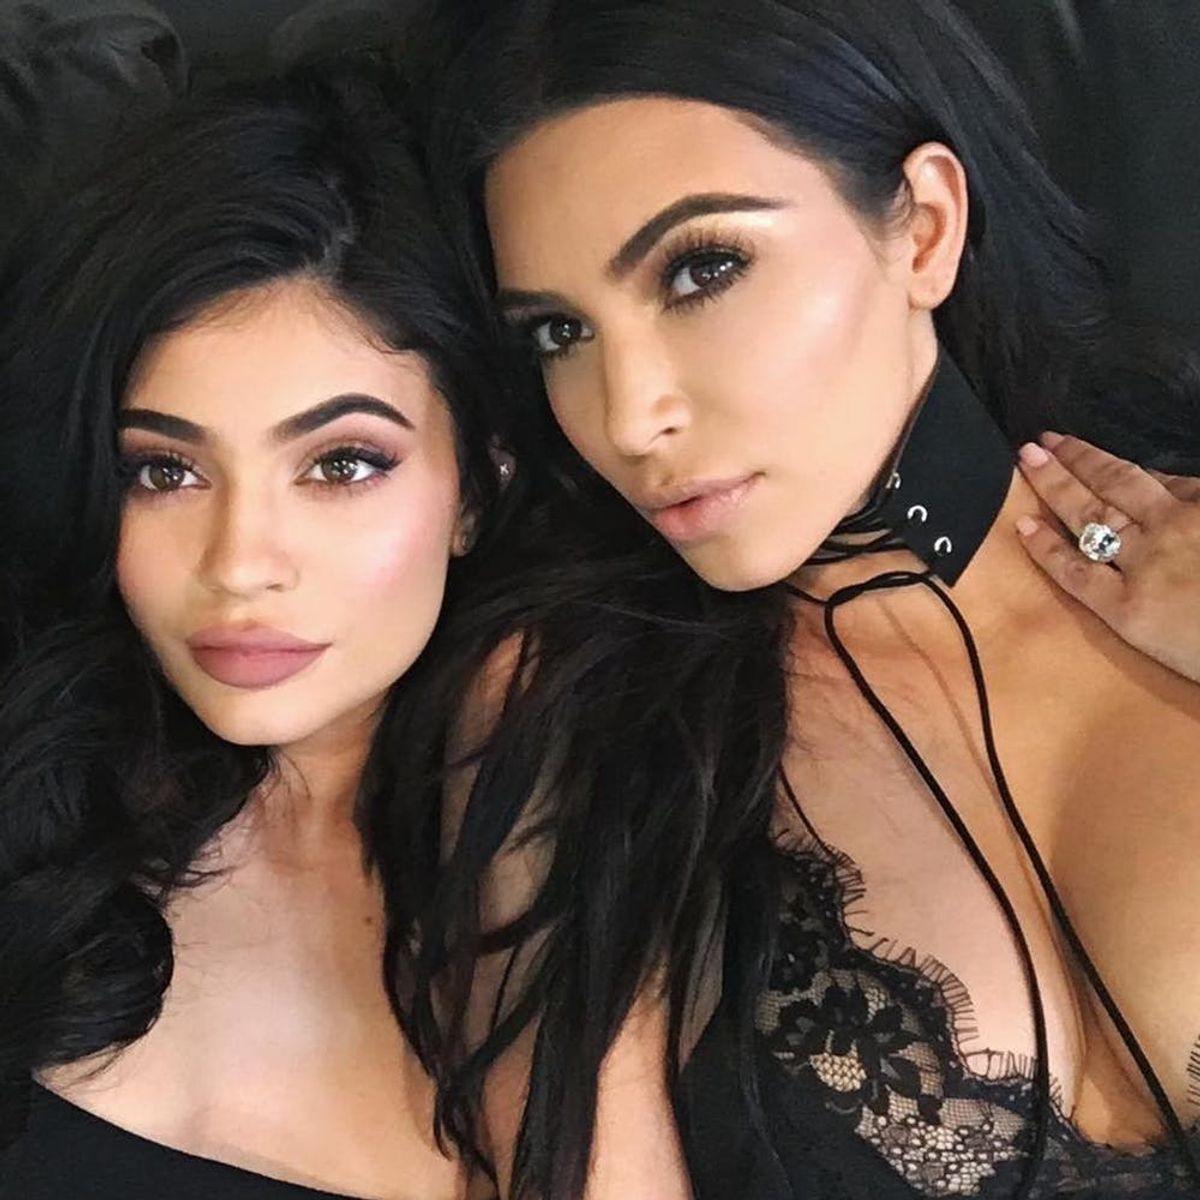 Kim Kardashian West and Kylie Jenner Are Doing a Makeup Collab